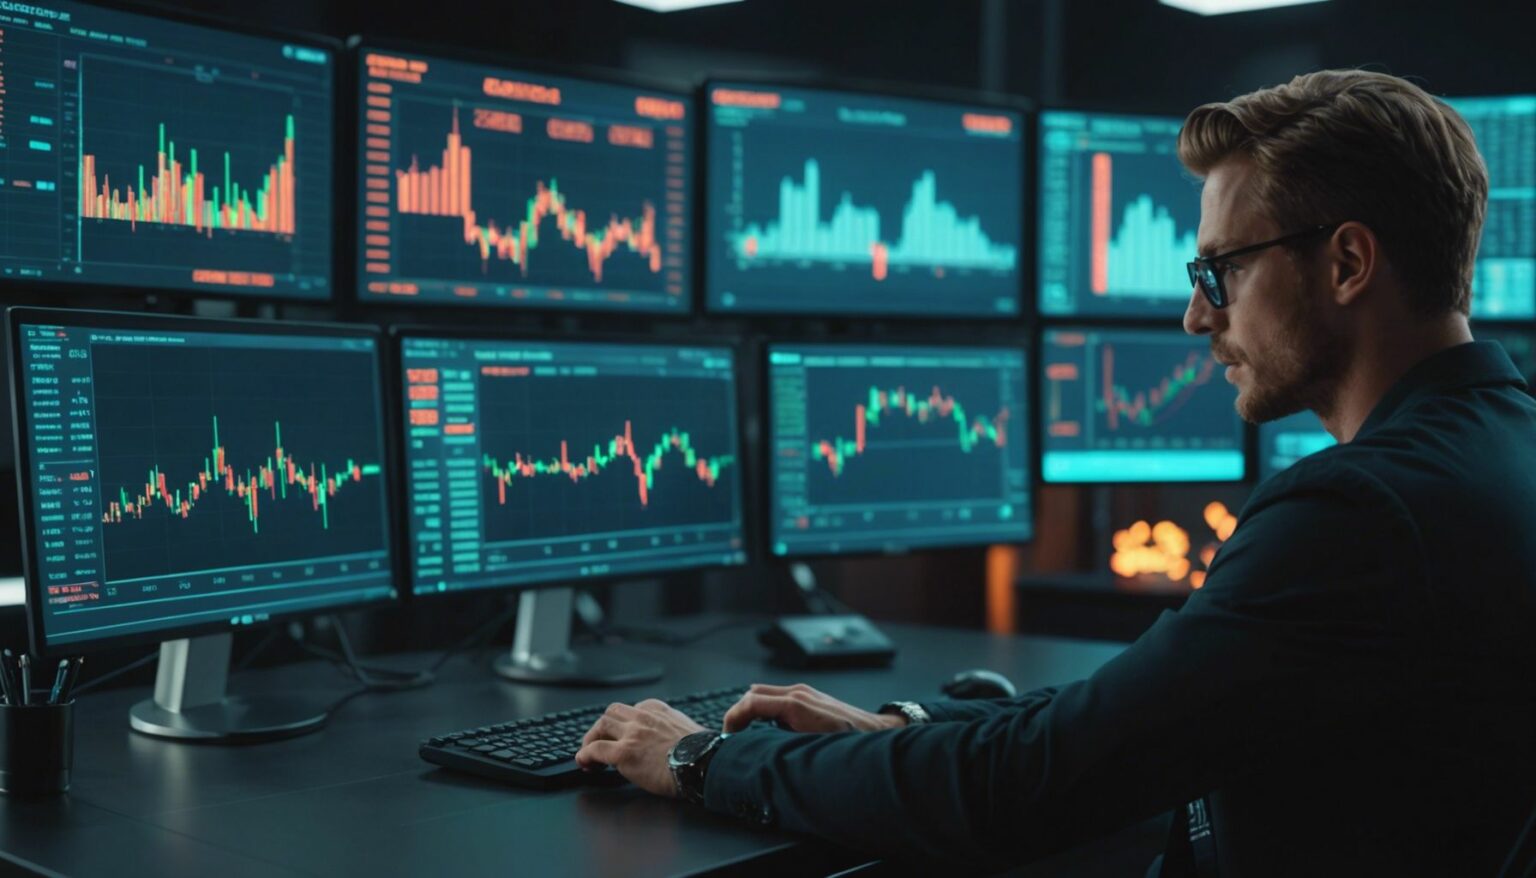 Futuristic trading interface with candlestick charts and cryptocurrency symbols, showing a trader analyzing data on a holographic screen.